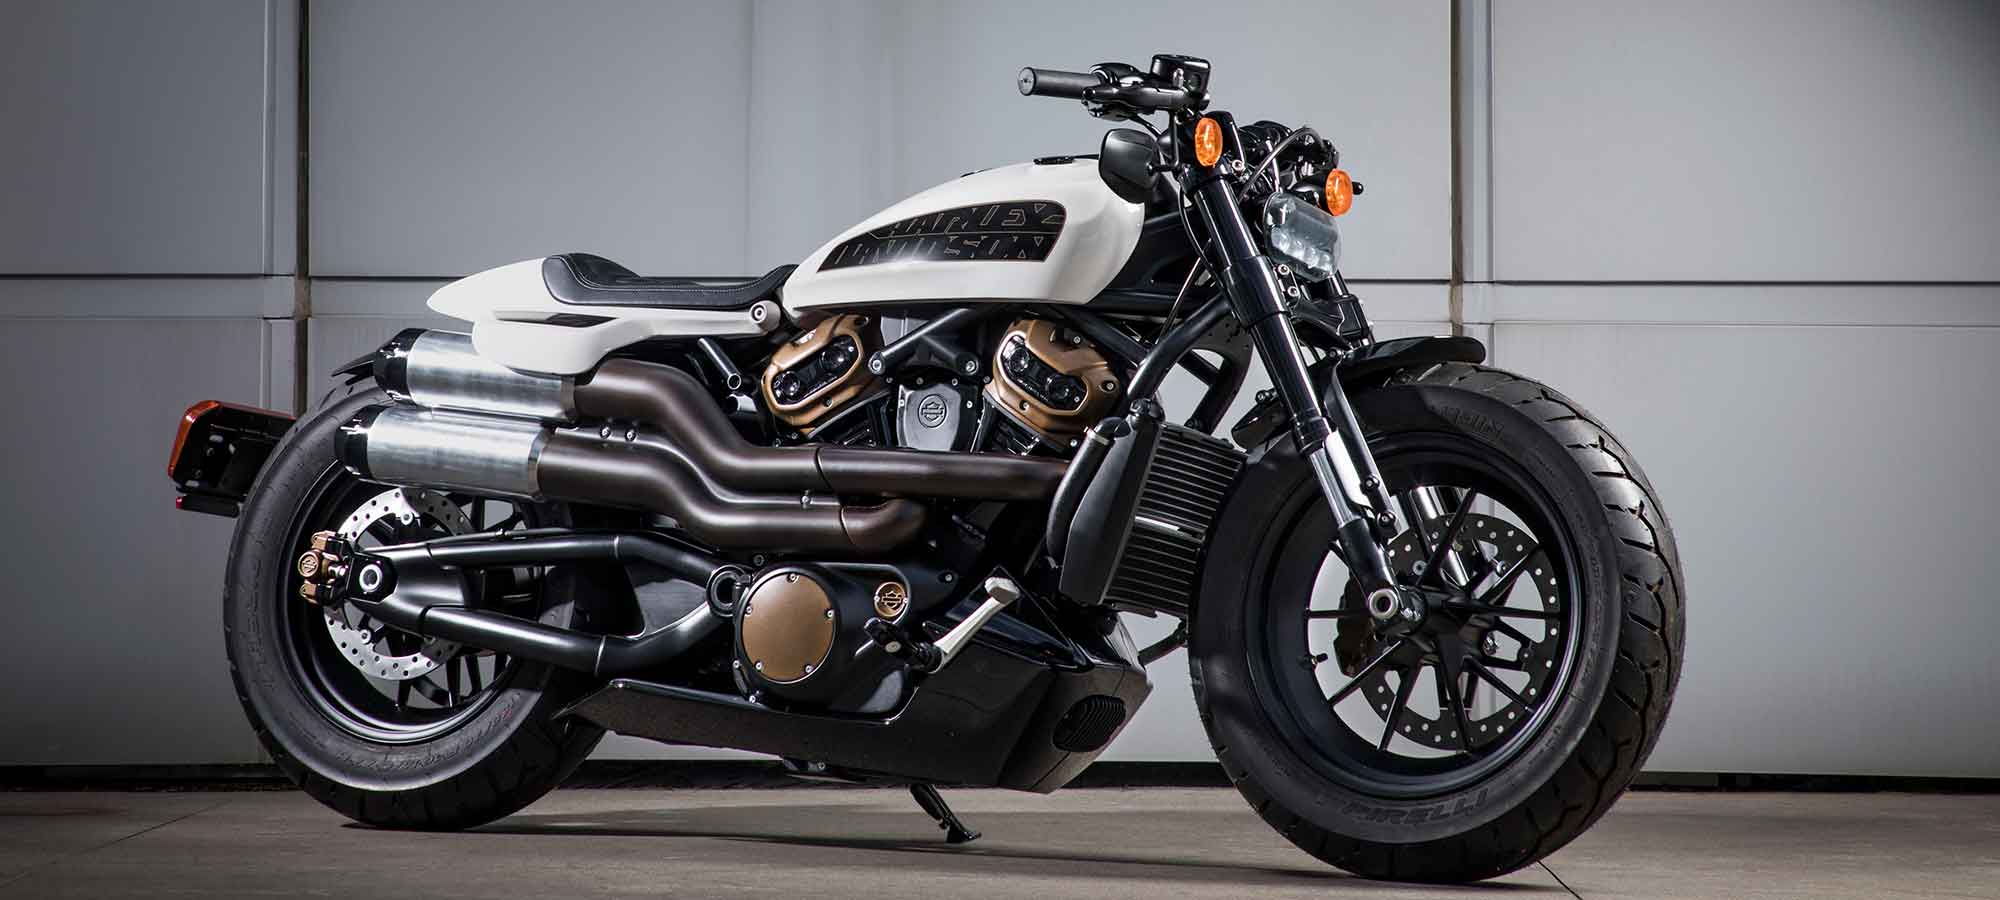 The New Sportster 2020 Harley Davidson 1 250cc Custom Preview Motorcyclist